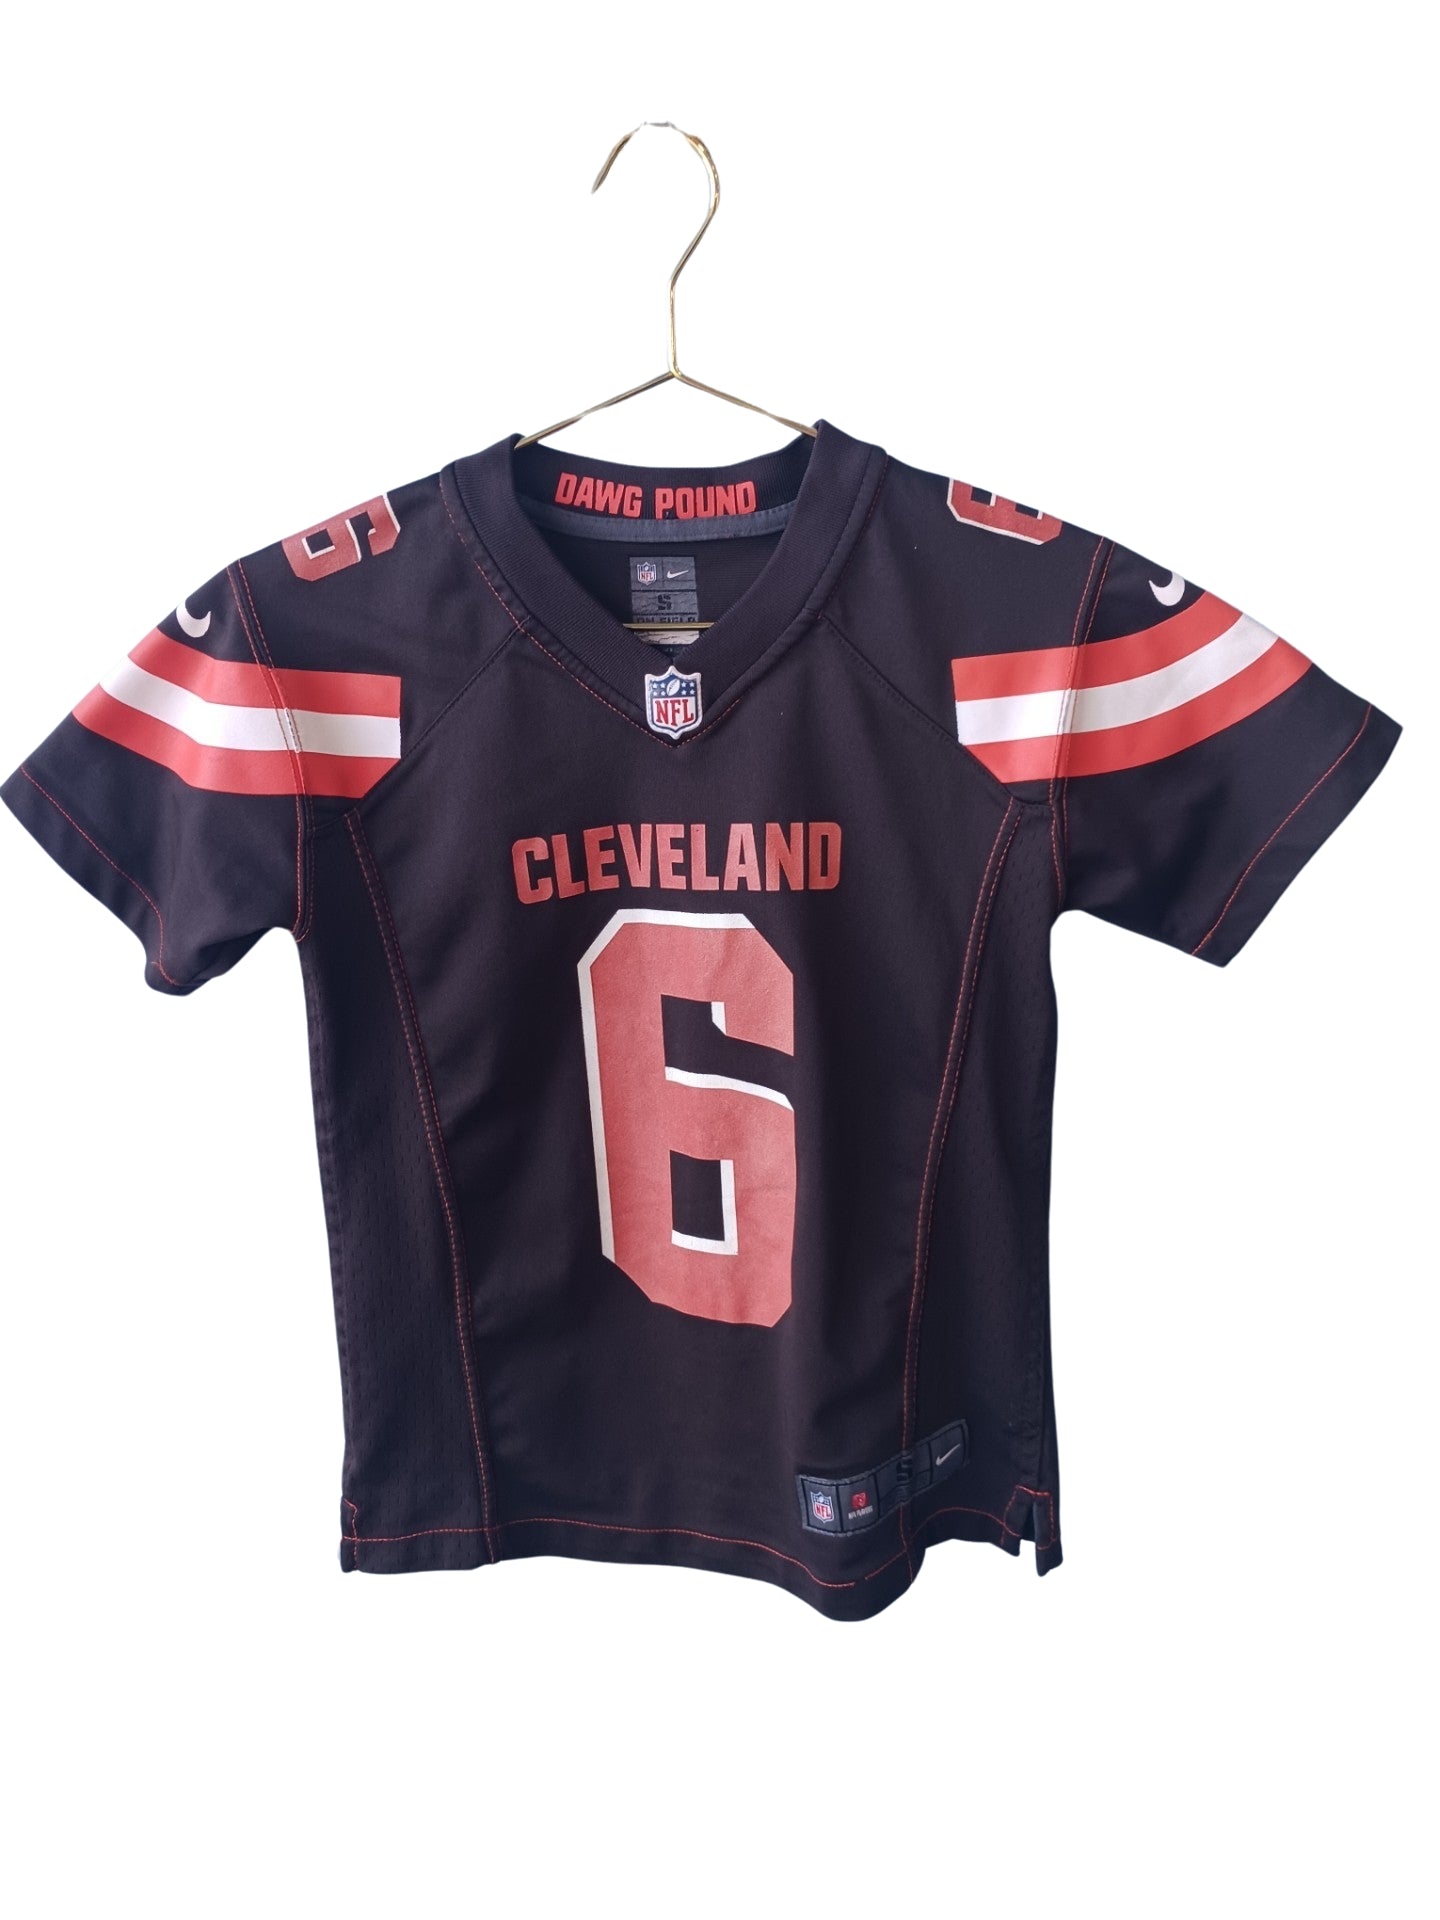 Womens NFL Team Cleveland Browns Baker Mayfield Jersey, Size Small